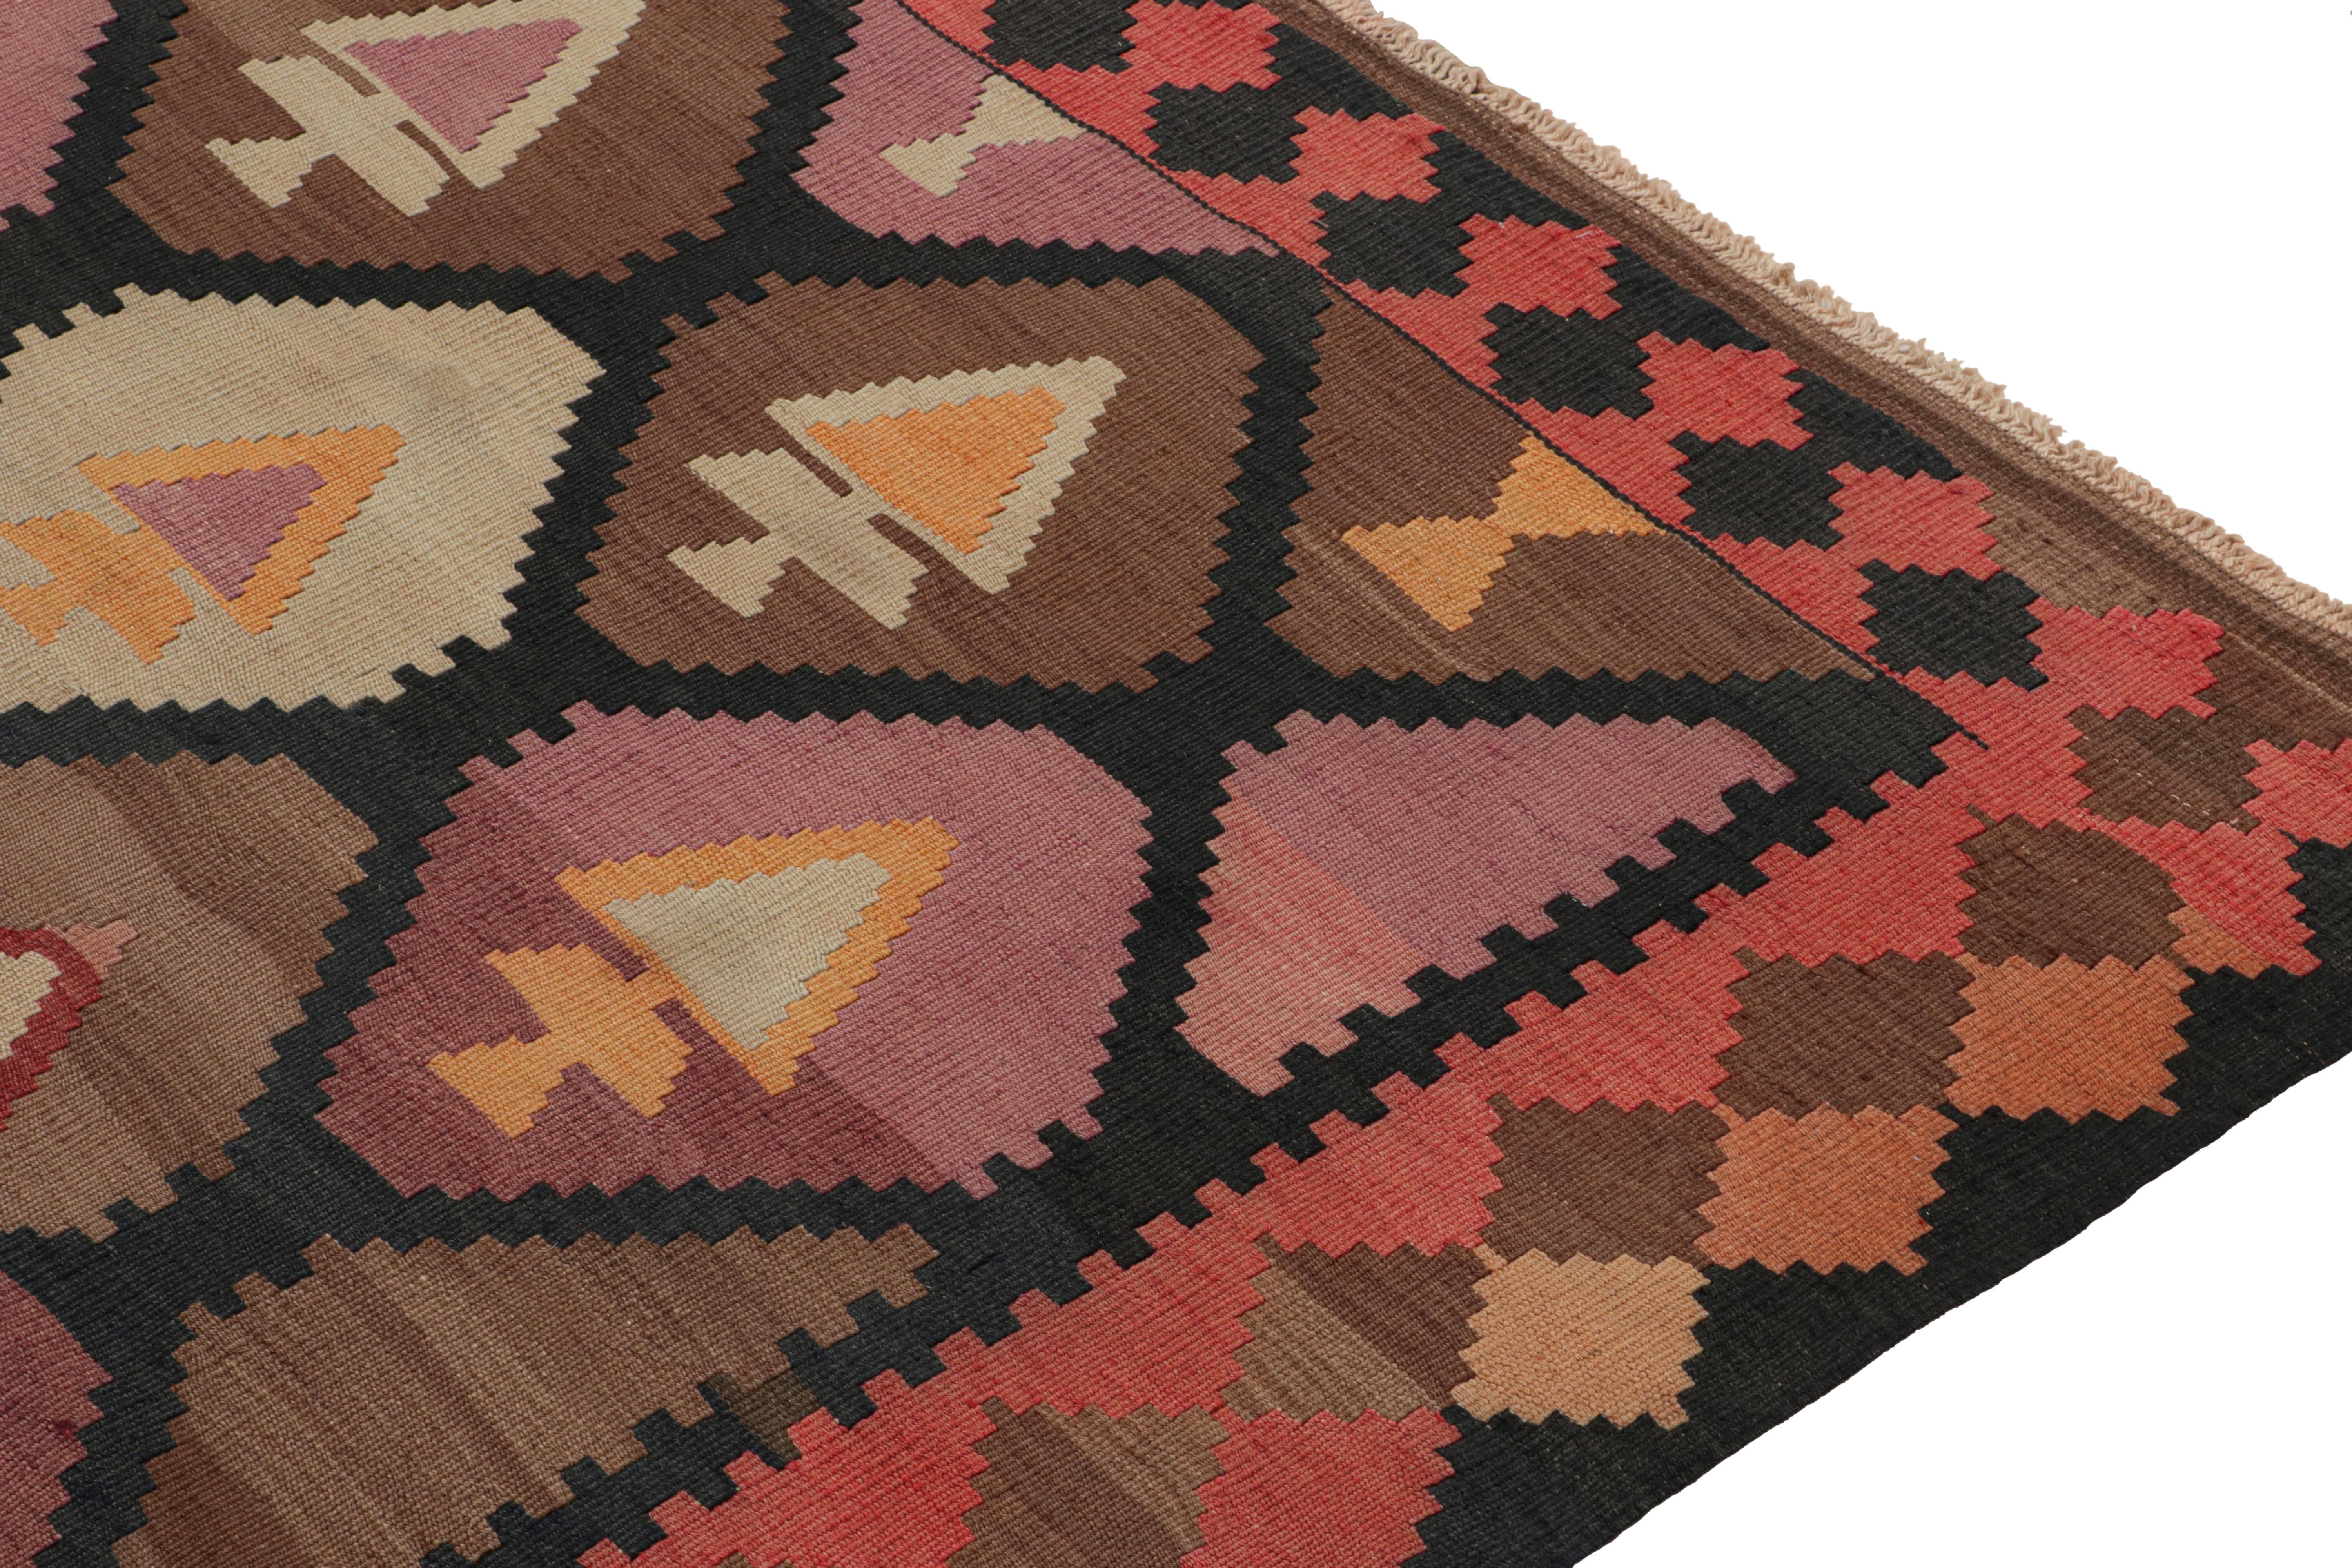 Vintage Persian Kilim in Red, Black and Brown Geometric Patterns by Rug & Kilim In Good Condition For Sale In Long Island City, NY